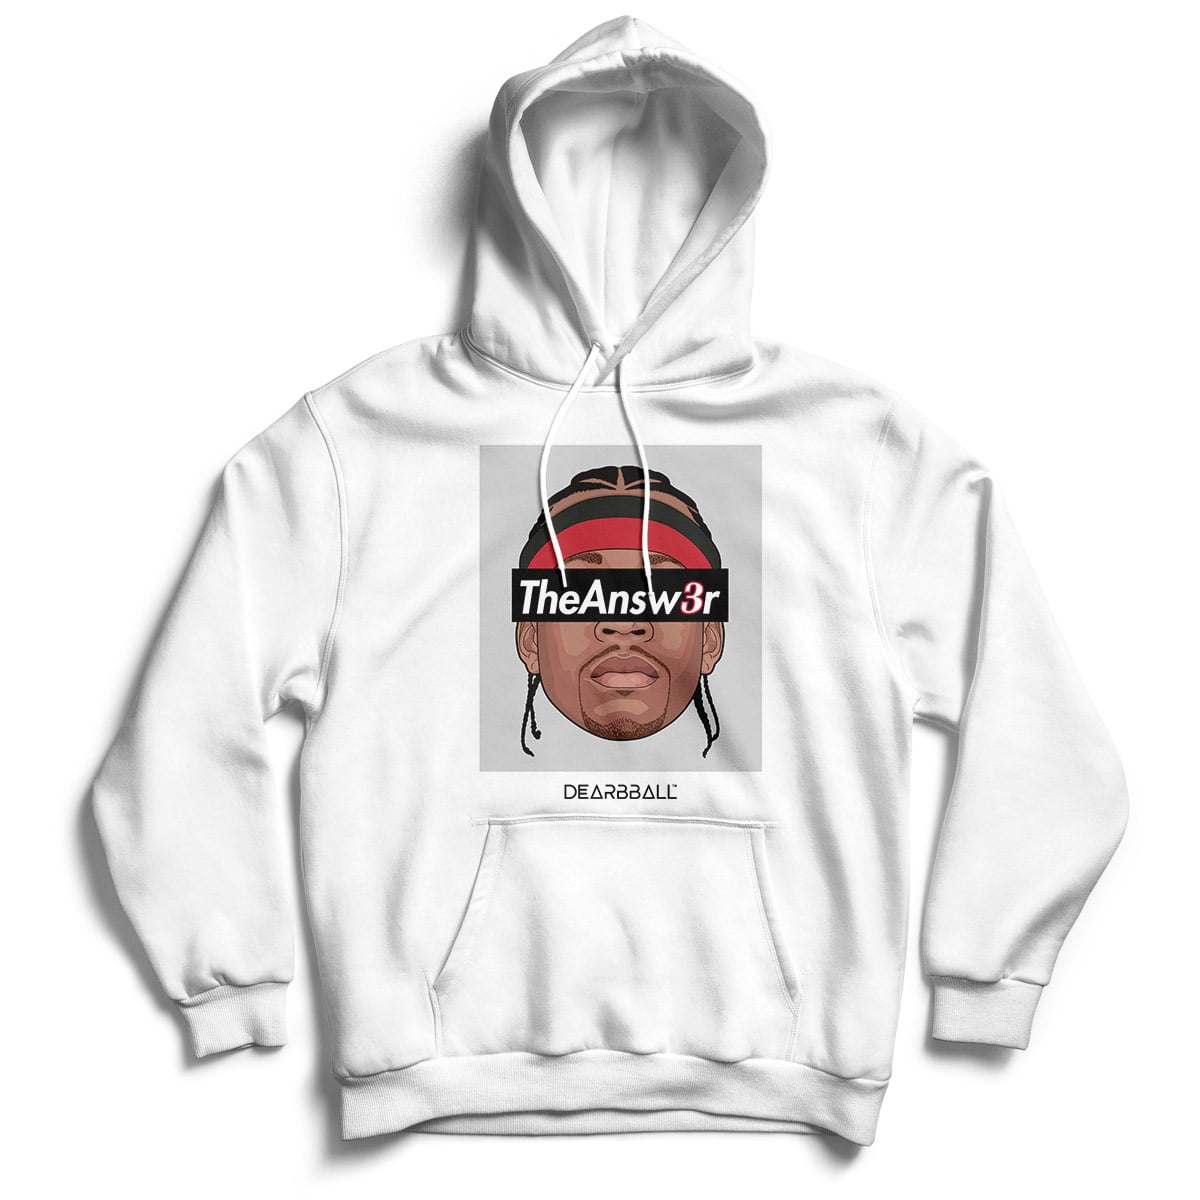 Hoodie-Allen-Iverson-Philadelphia-Sixers-Dearbball-clothes-brand-france